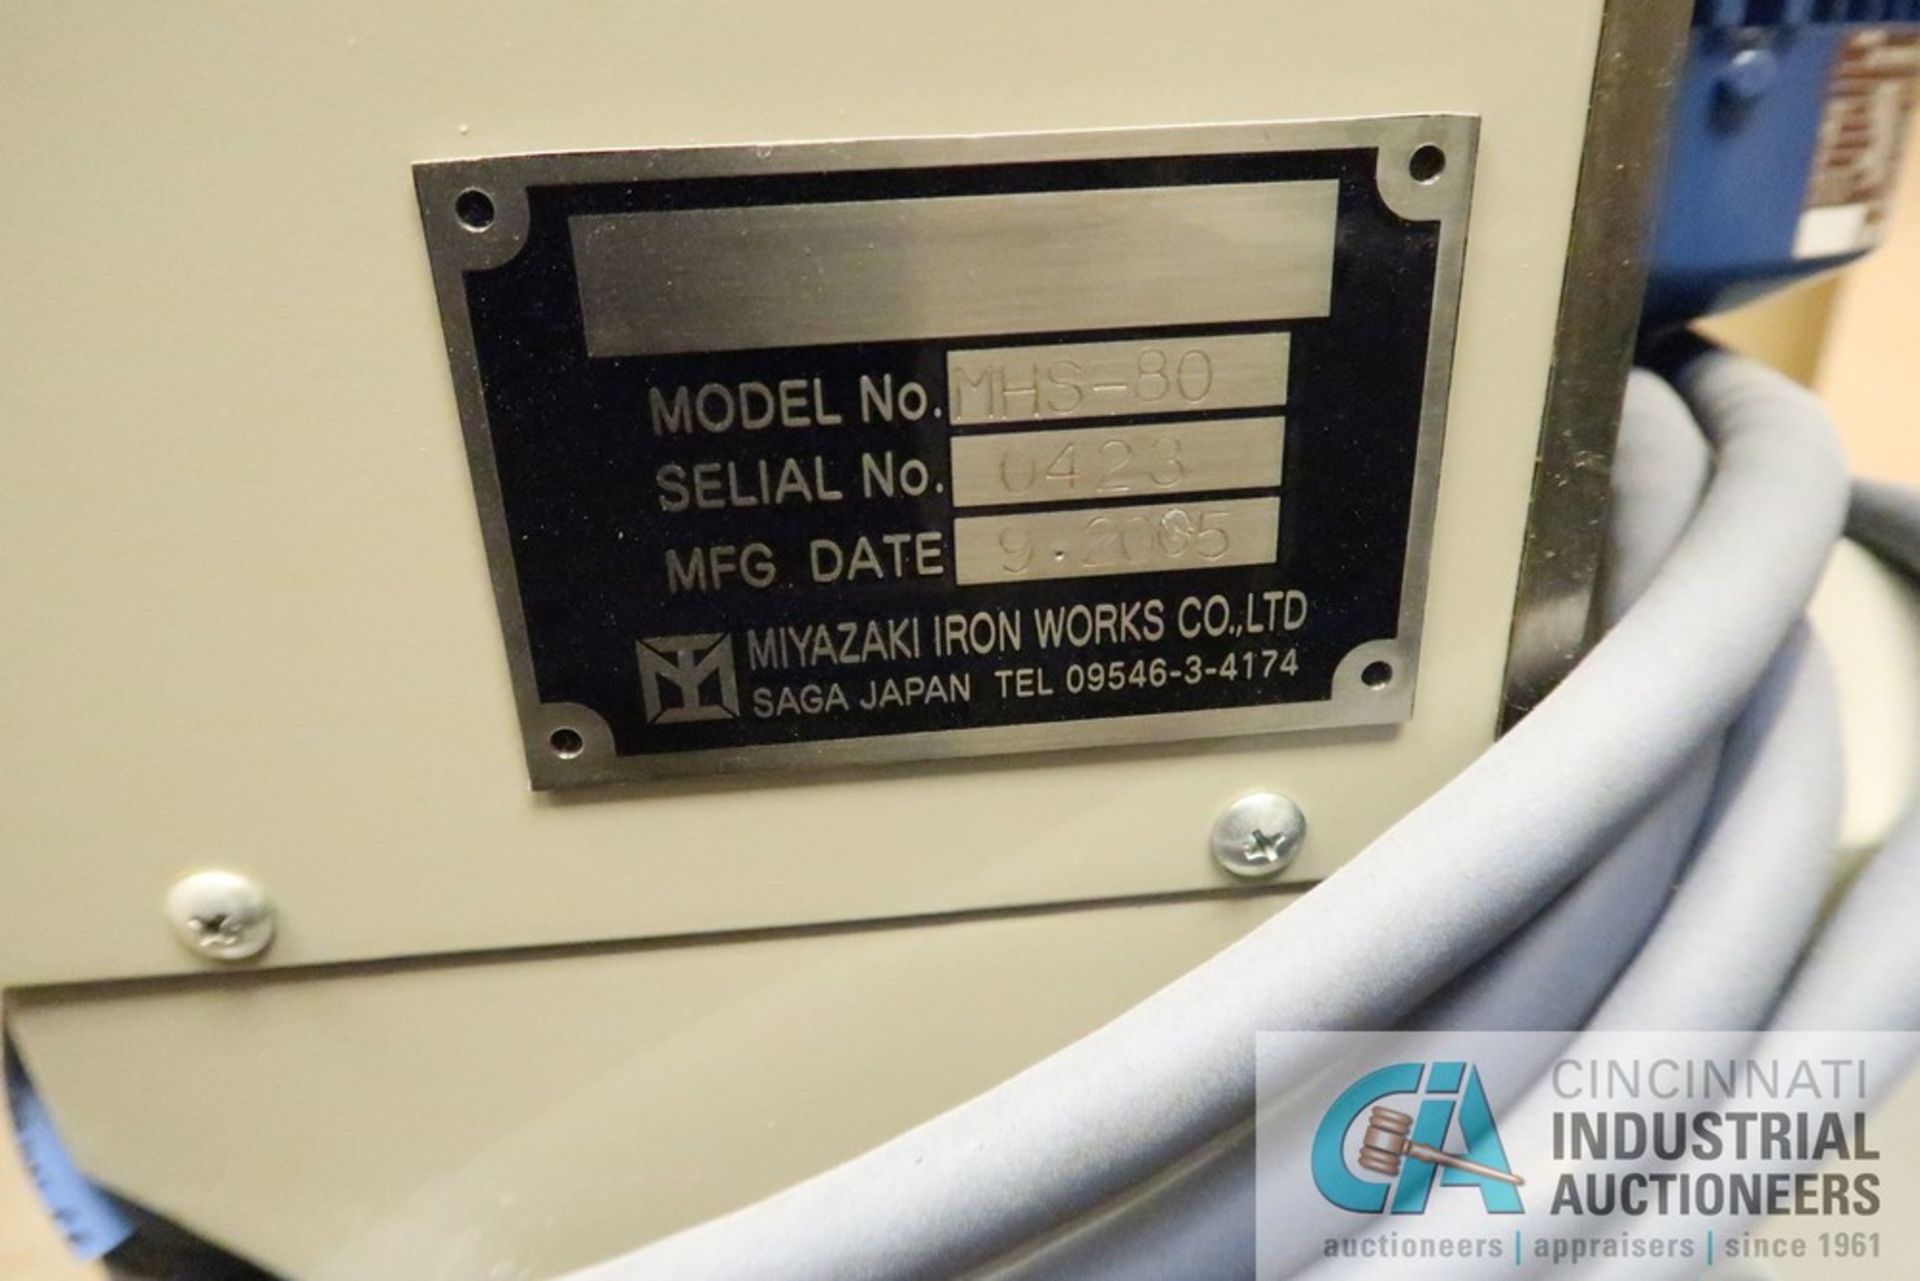 MIYAZAKI MODEL MHS-80 HIGH SPEED MIXER; S/N 0423 (ROOM 29) - Located in the basement - Image 3 of 3